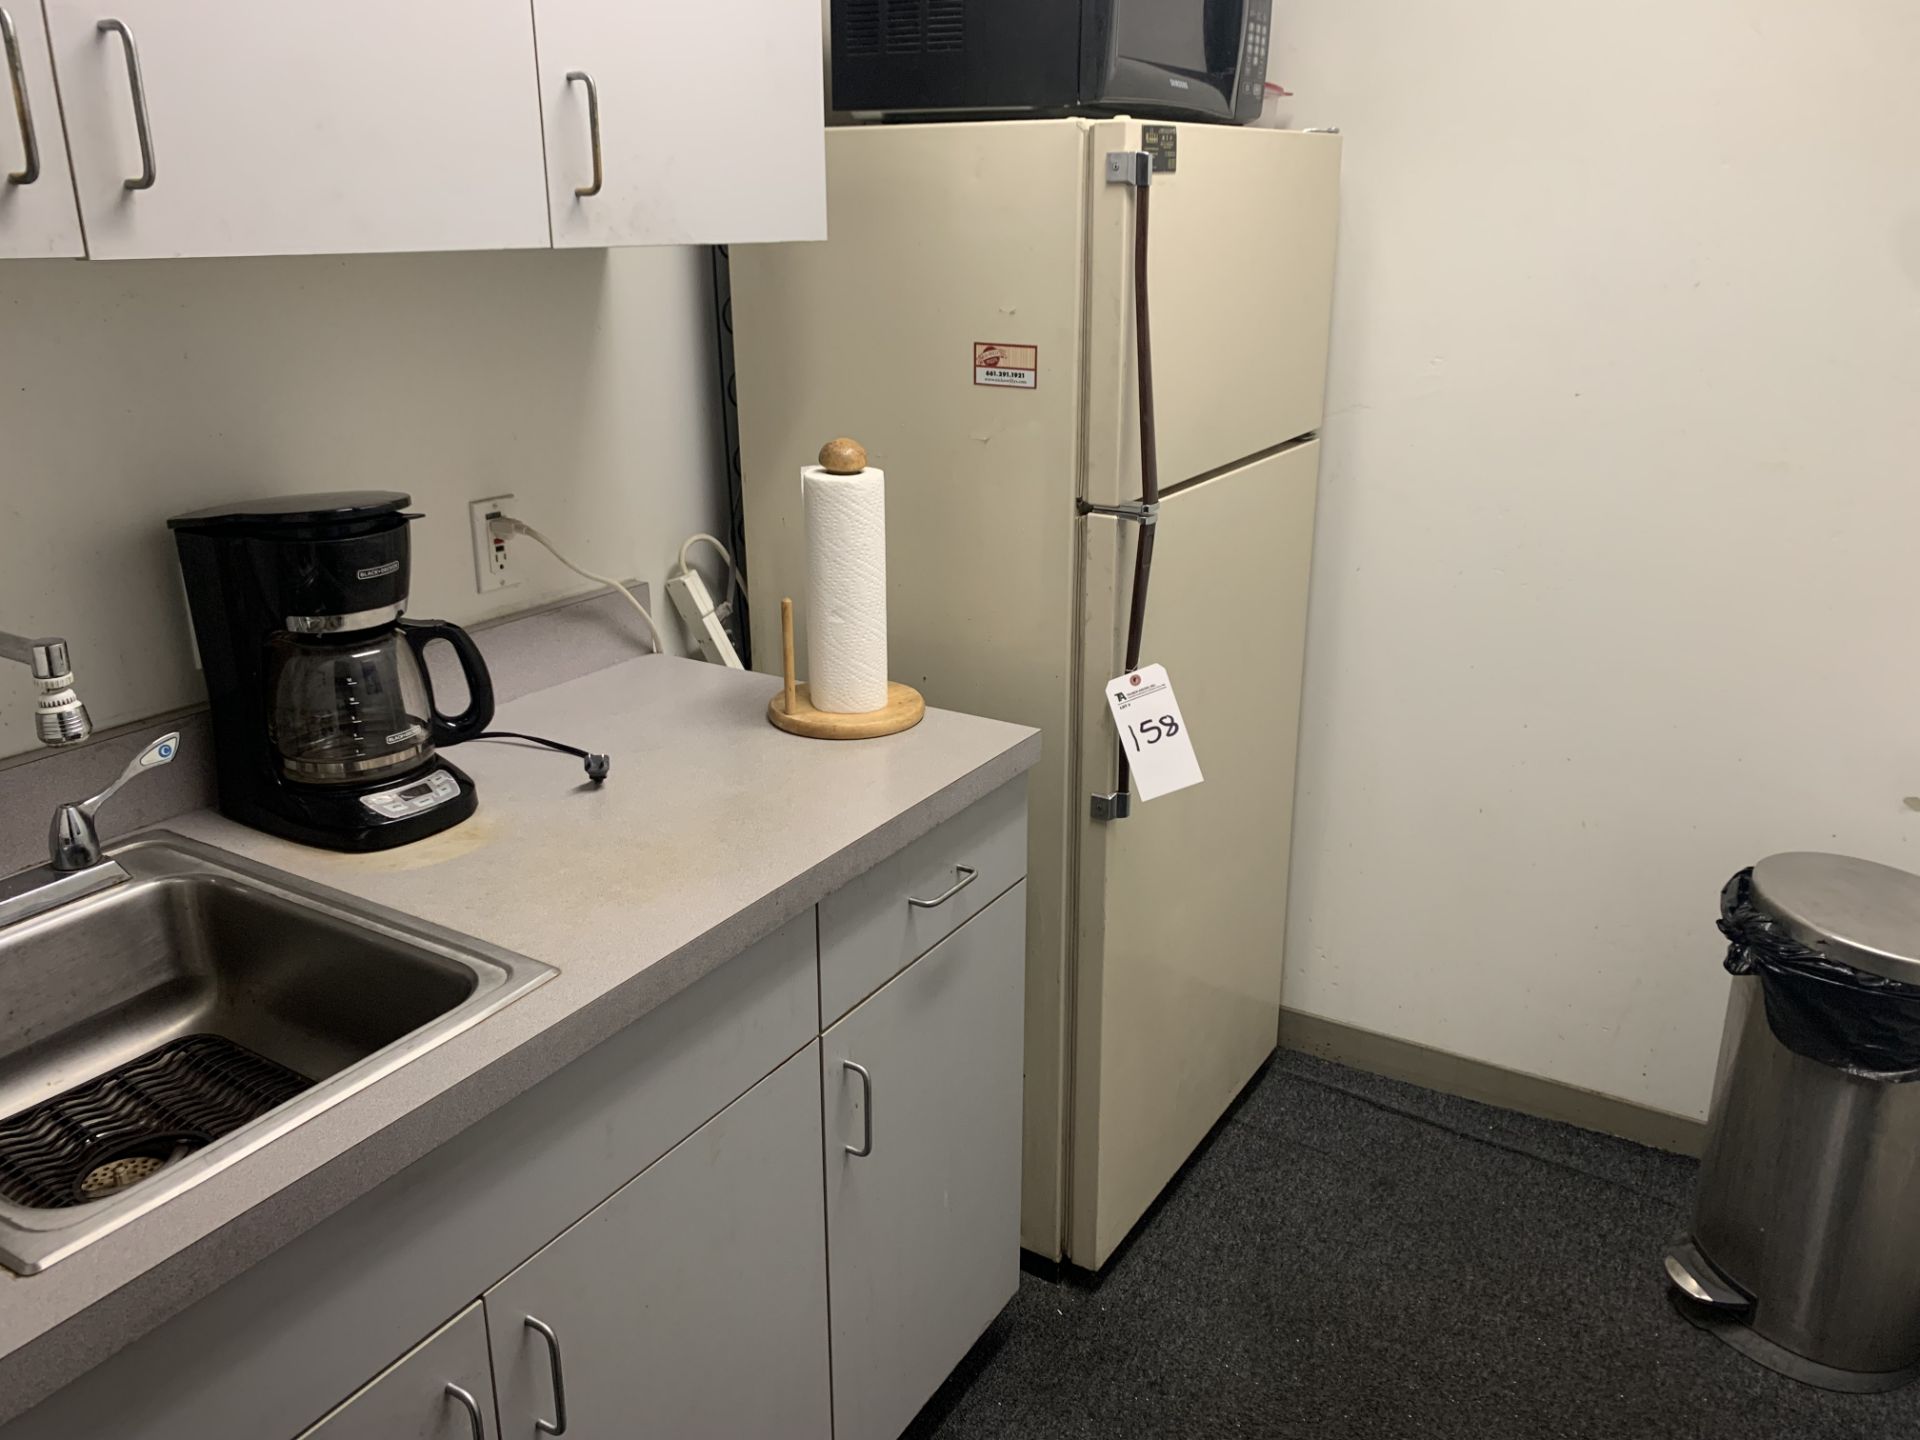 (Lot) Room and Contents (Refrigerator, Coffee Maker)